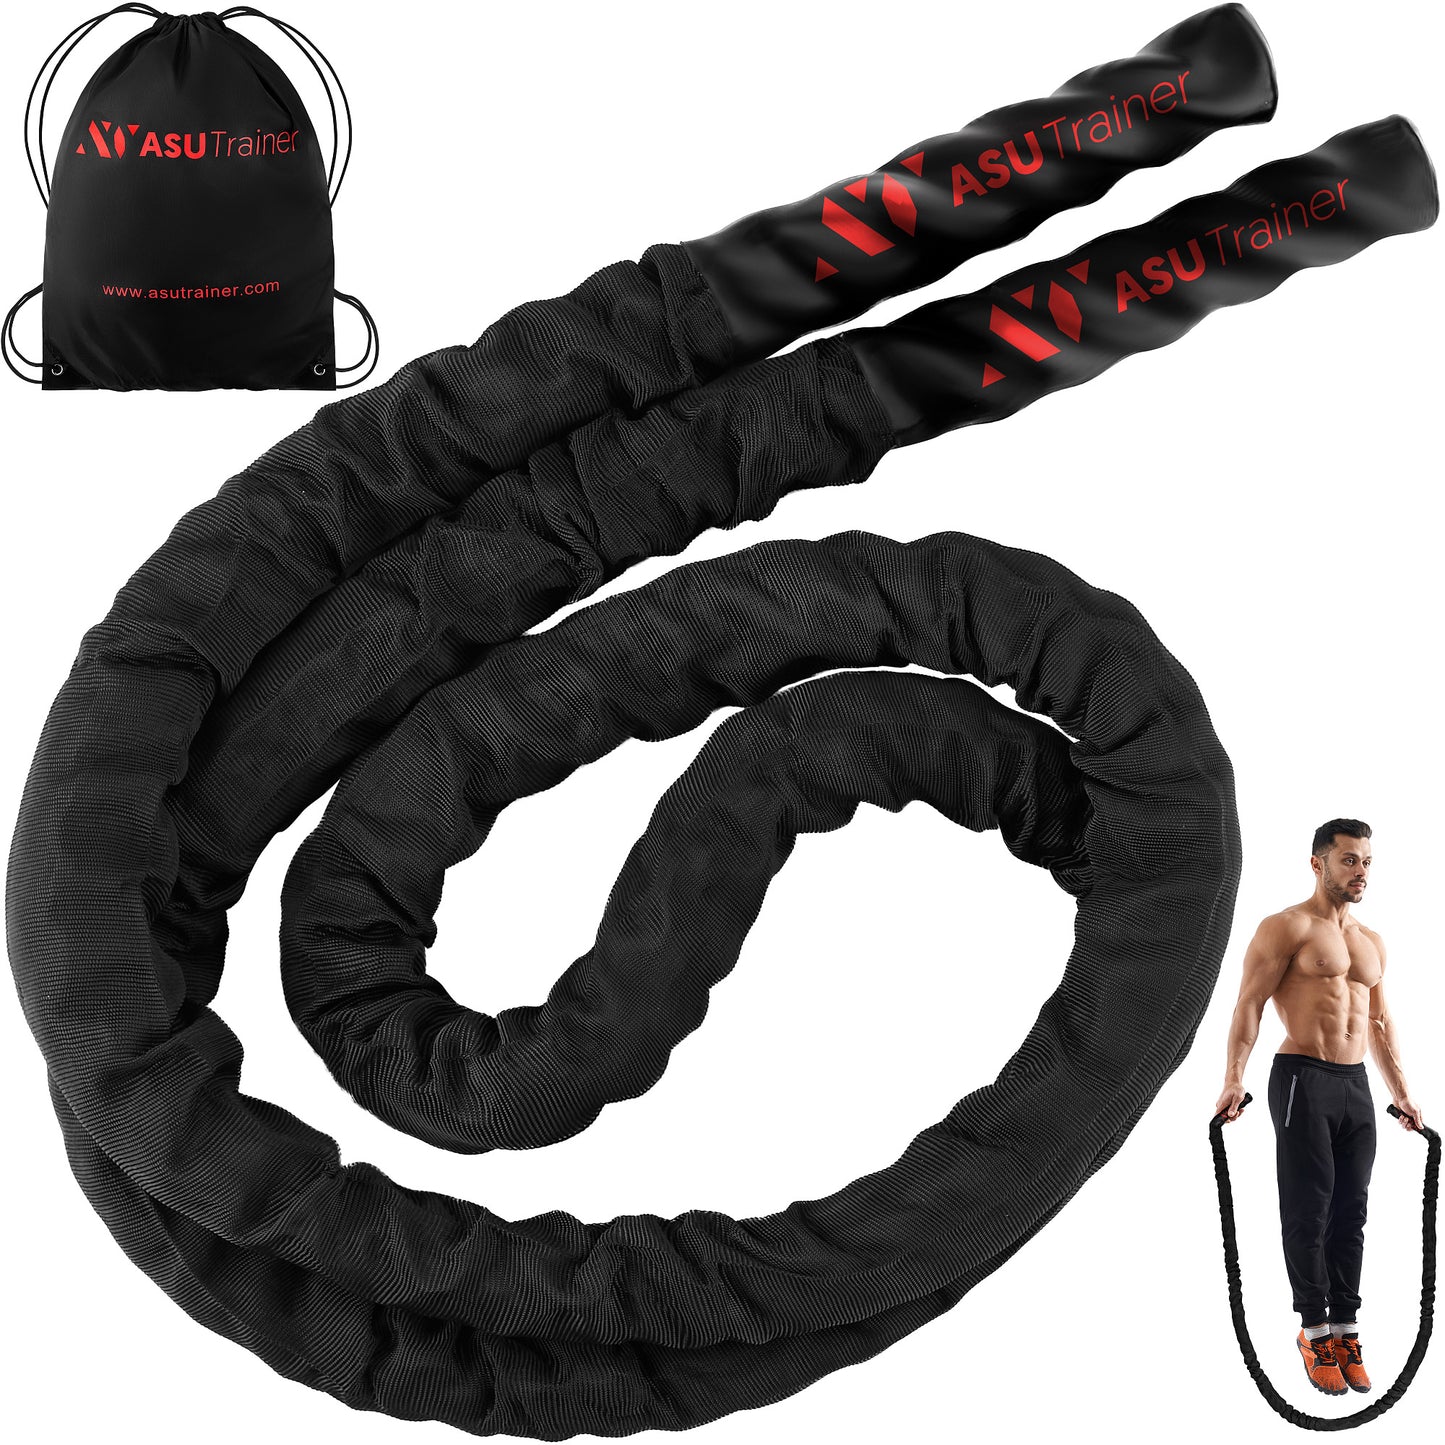 Weighted Jump Rope By ASU Trainer